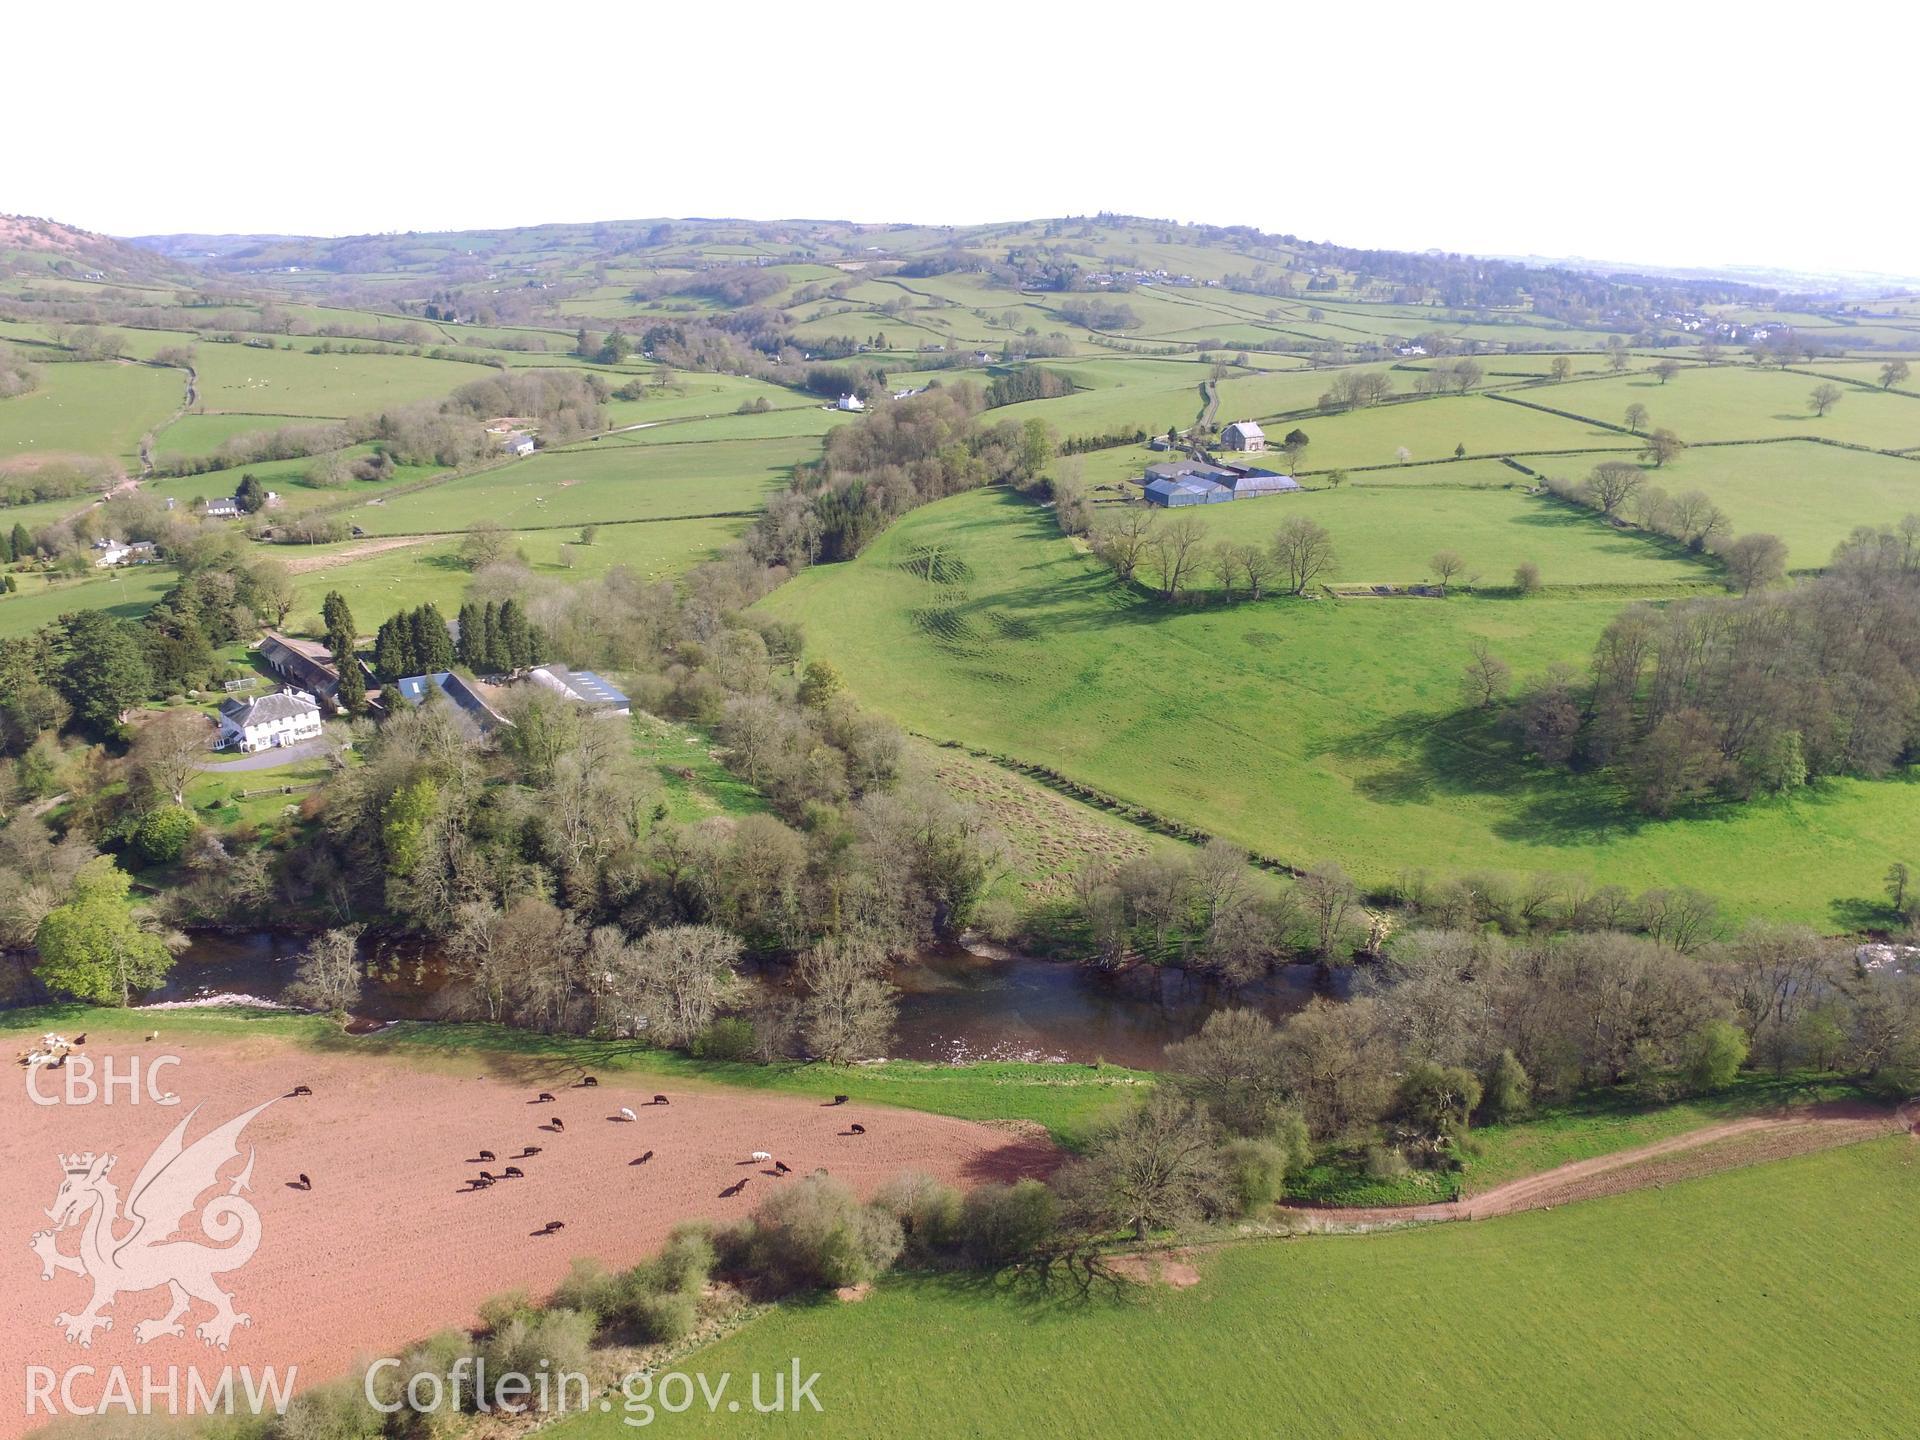 Colour aerial photo showing Brecon Gaer Roman Fort, taken by Paul R. Davis, 5th May 2016.